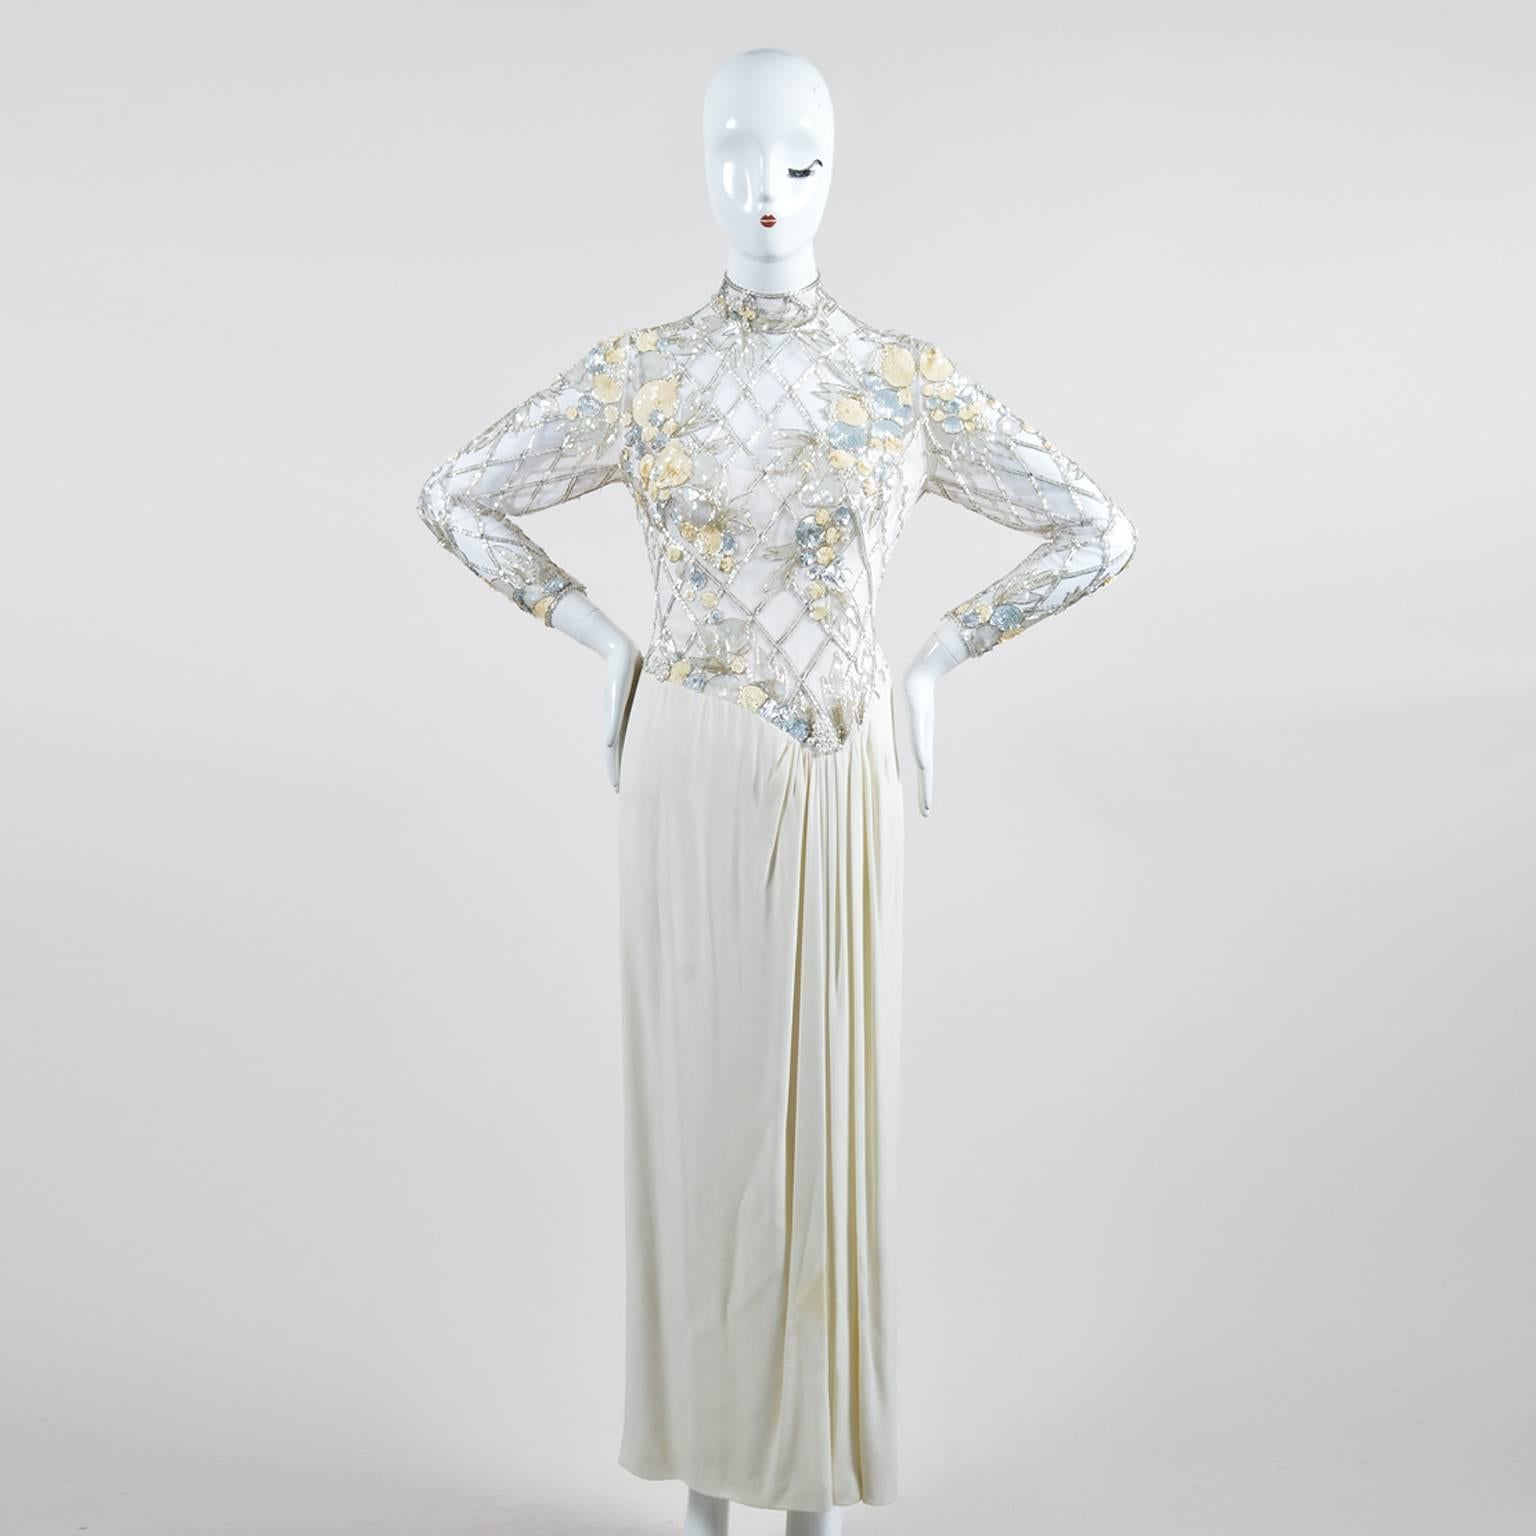 Vintage Bob Mackie maxi-length high-neck gown in white. Features a mesh bust and sleeves, an embellished bodice, and pleated front. Embellishment is composed of pearls, crystals, tonal/iridescent/silver-tone sequins, and cylinder beads. Sleeves